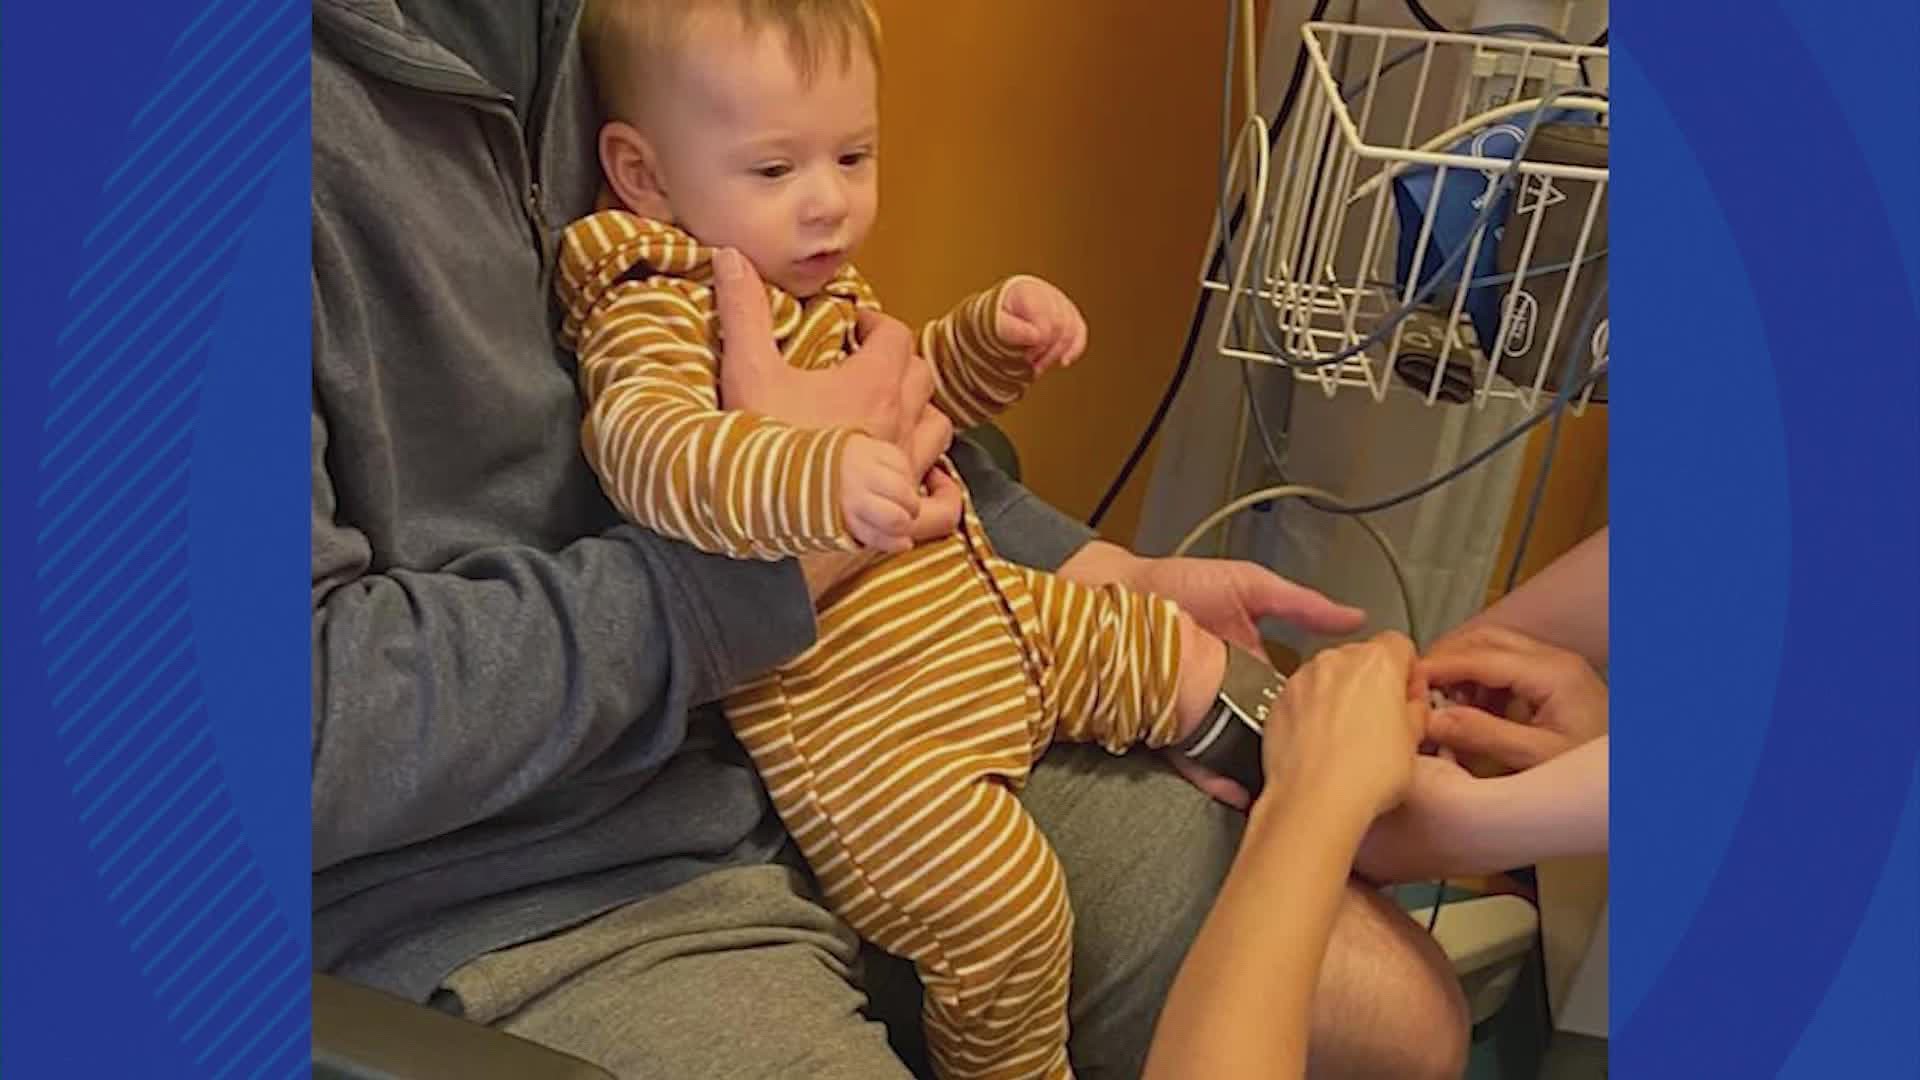 Doctors will harvest Ollie’s bone marrow, and in June, he’ll undergo chemotherapy and 6 weeks in isolation while doctors perform the gene replacement therapy.